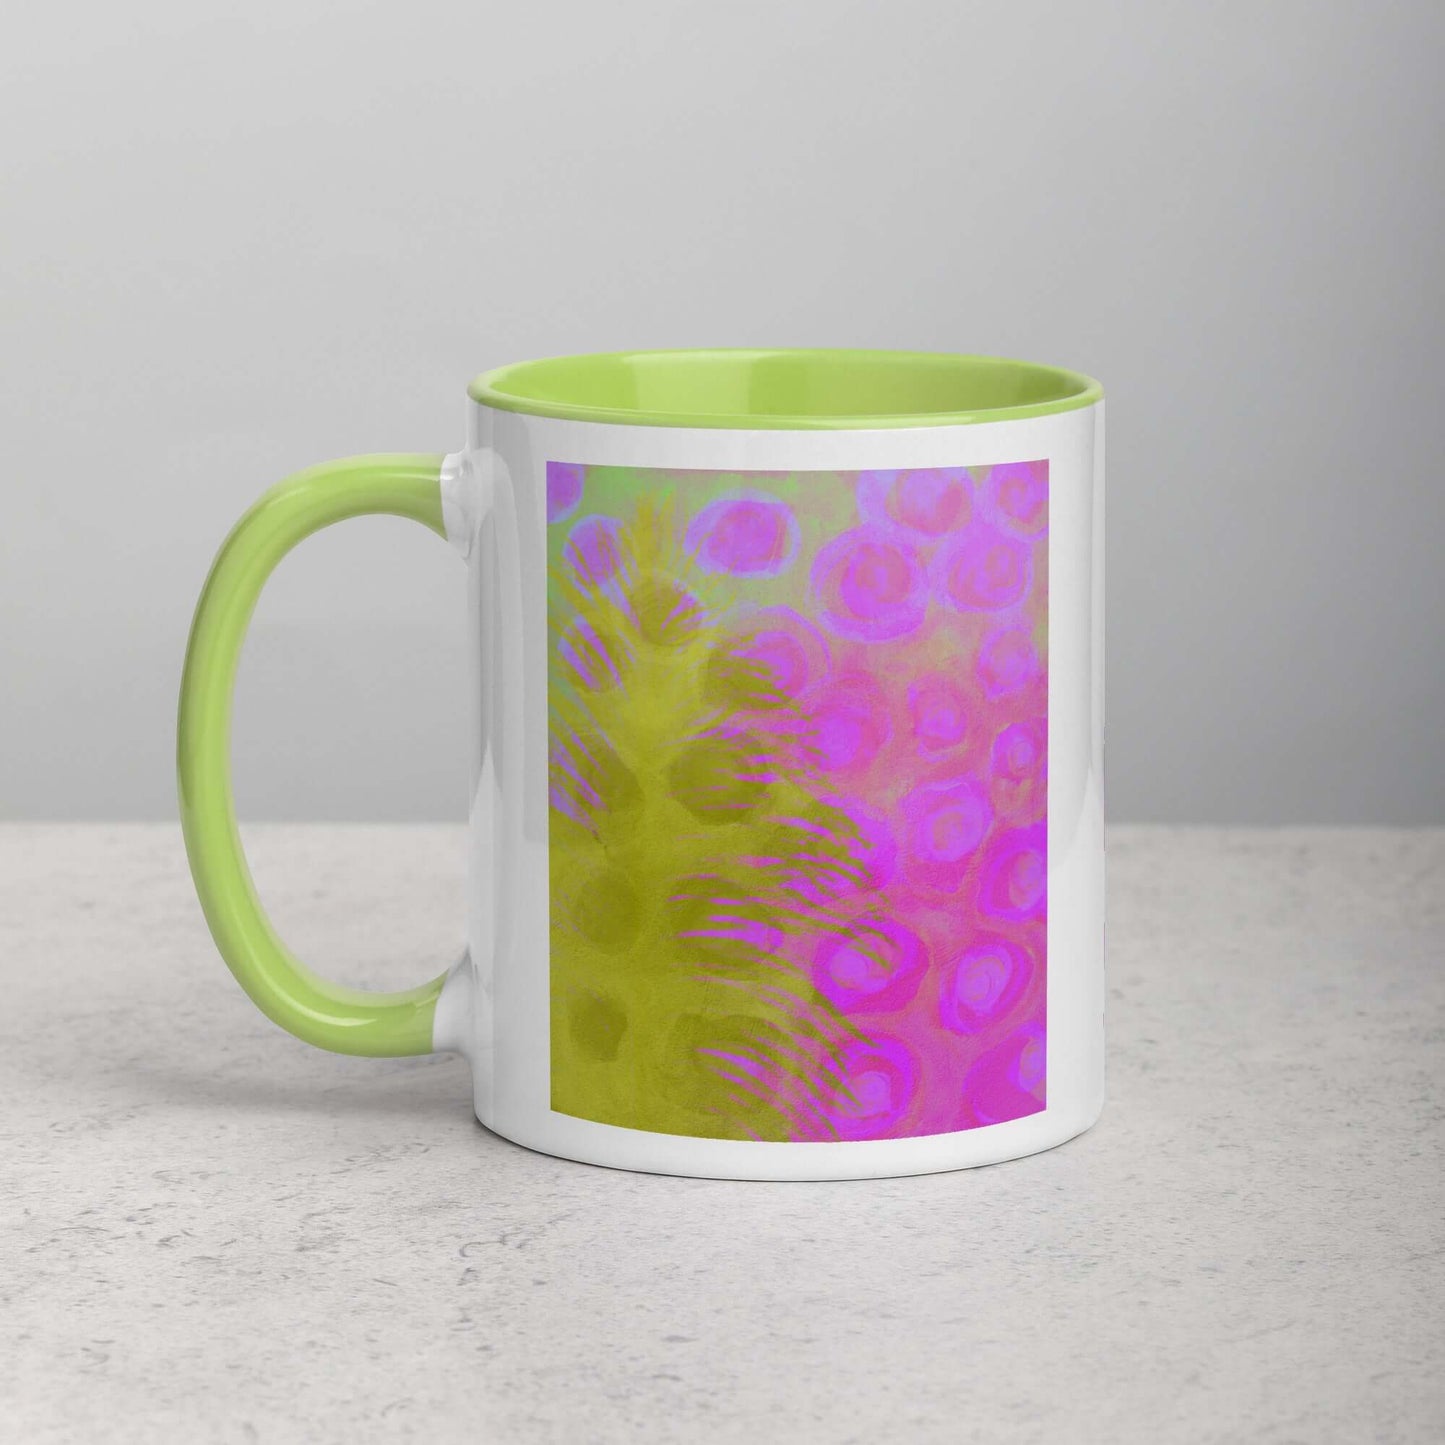 Olive Green Ostrich Feather on Pinkish-Purple Background “Olivine” Abstract Art Mug with Lime Green Color Inside Left Handed Front View